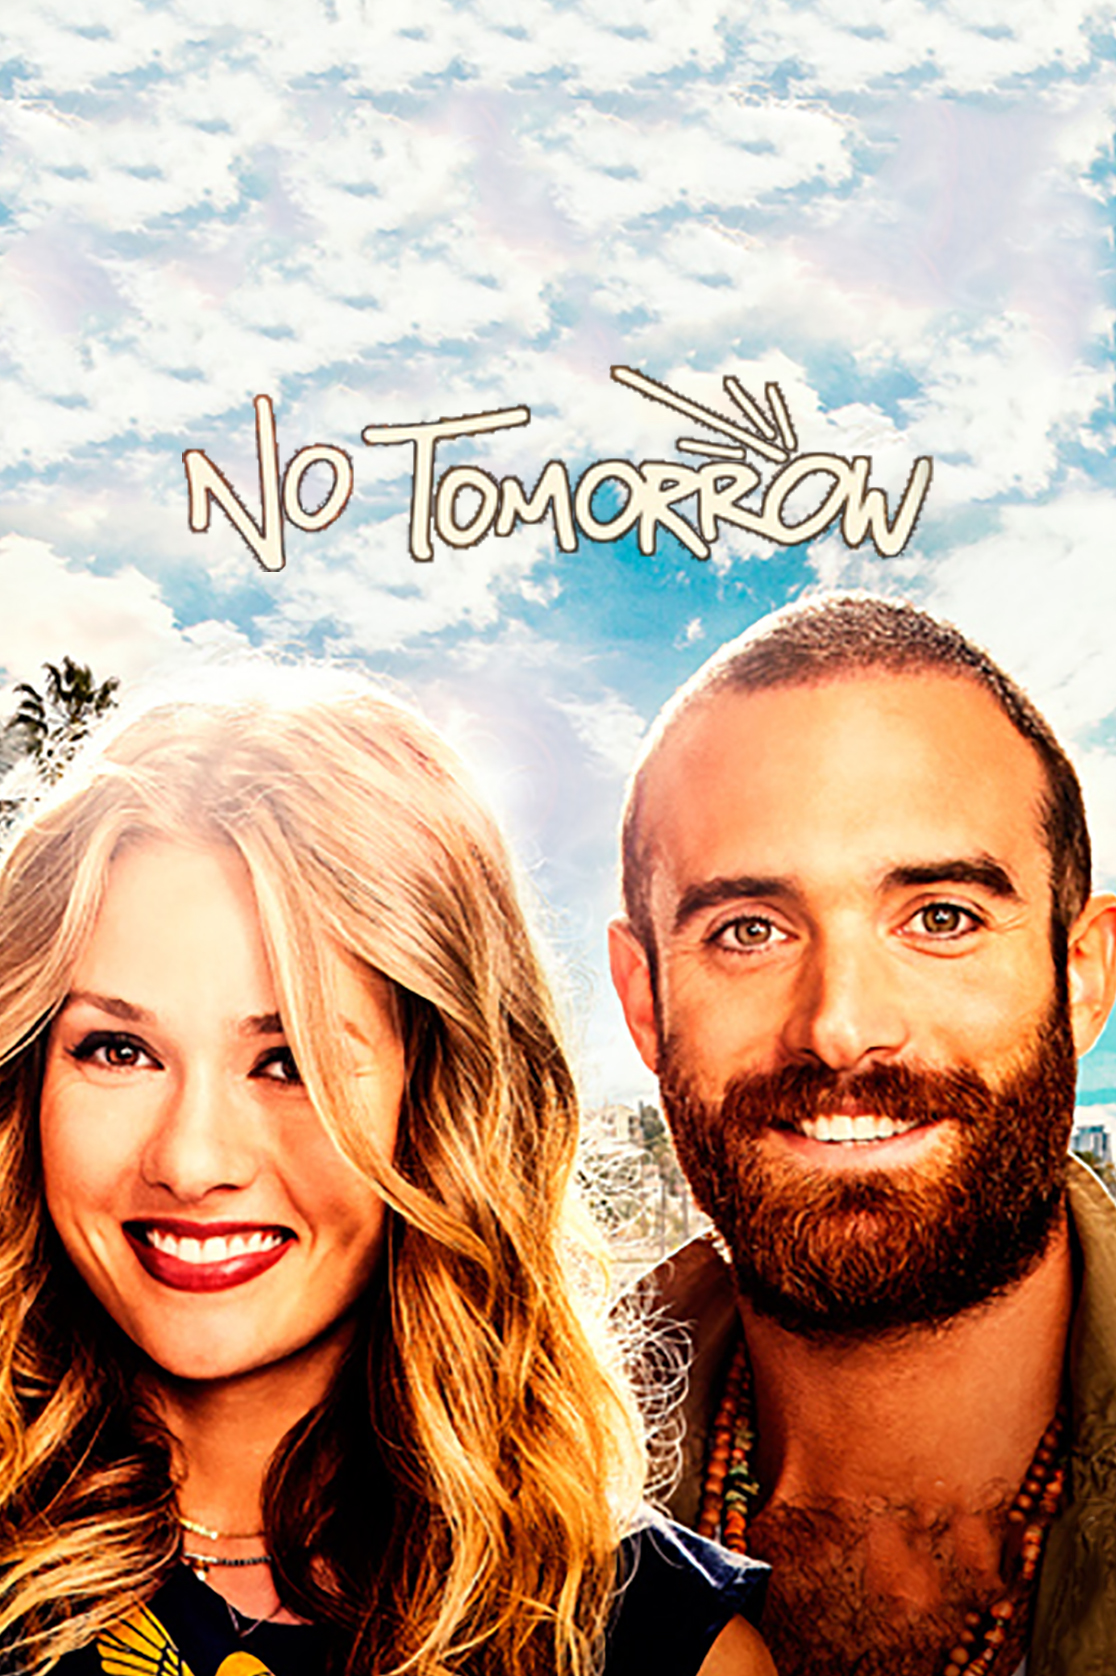 No Tomorrow - Where to Watch and Stream